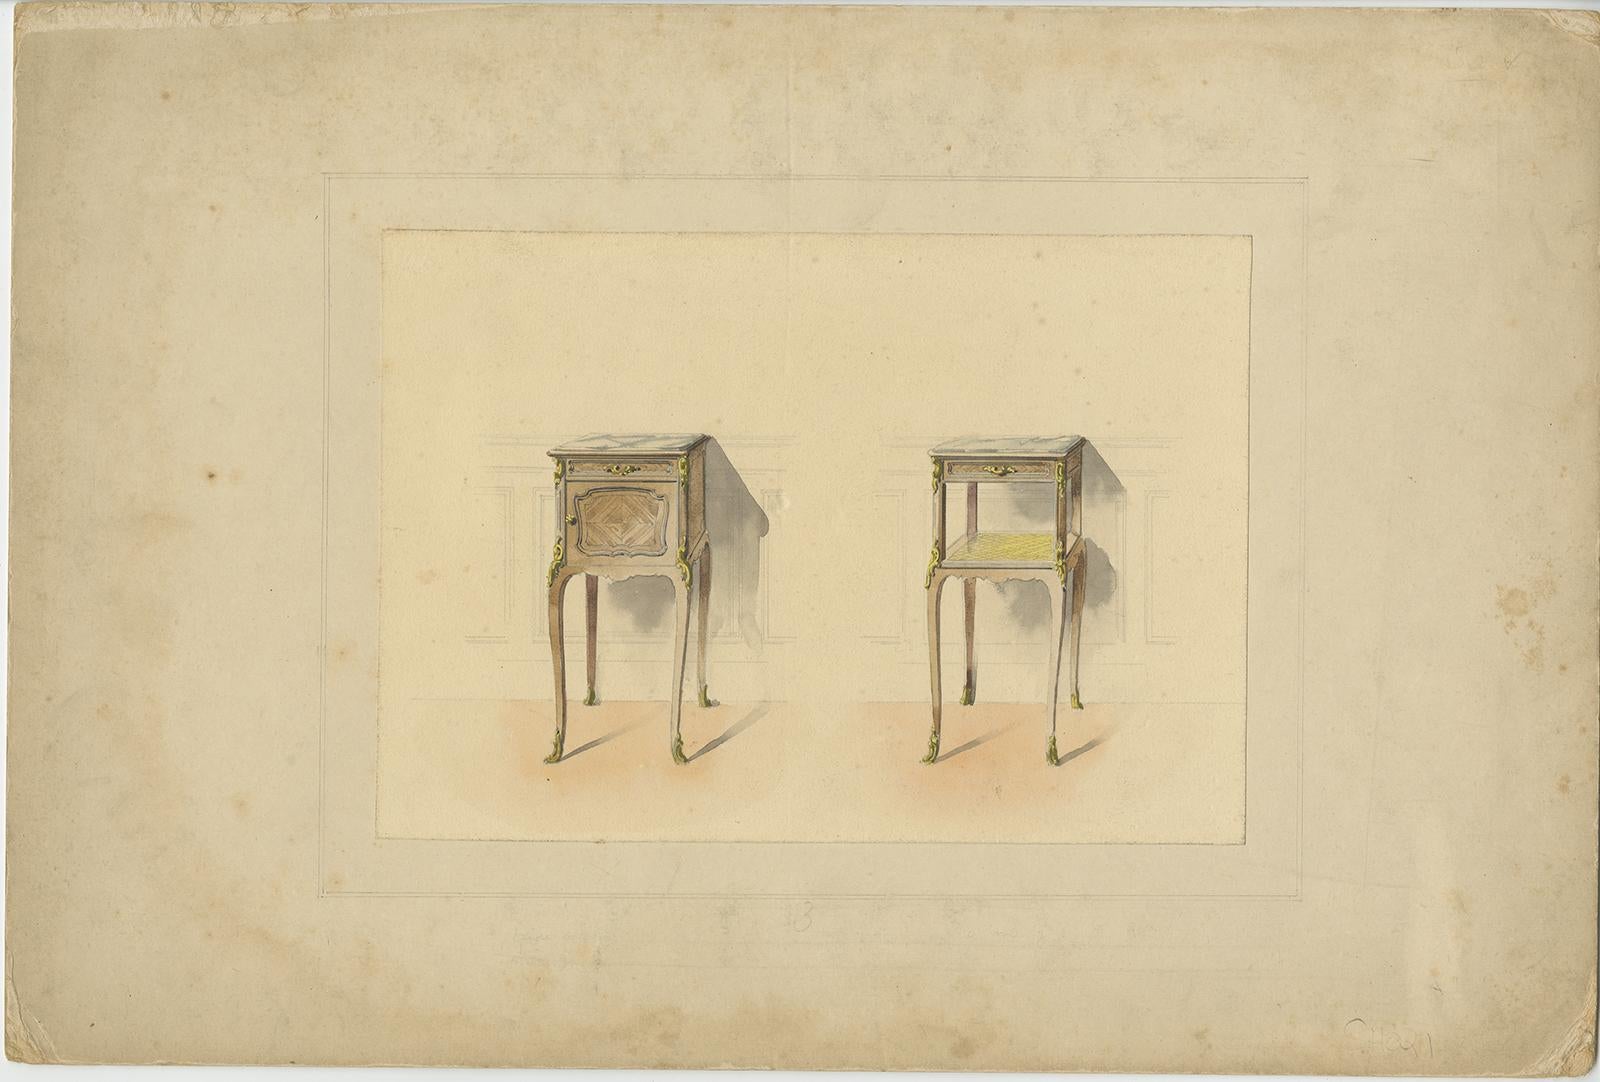 20th Century Antique Print of the Design of Two Sidetables/Furniture, circa 1900 For Sale